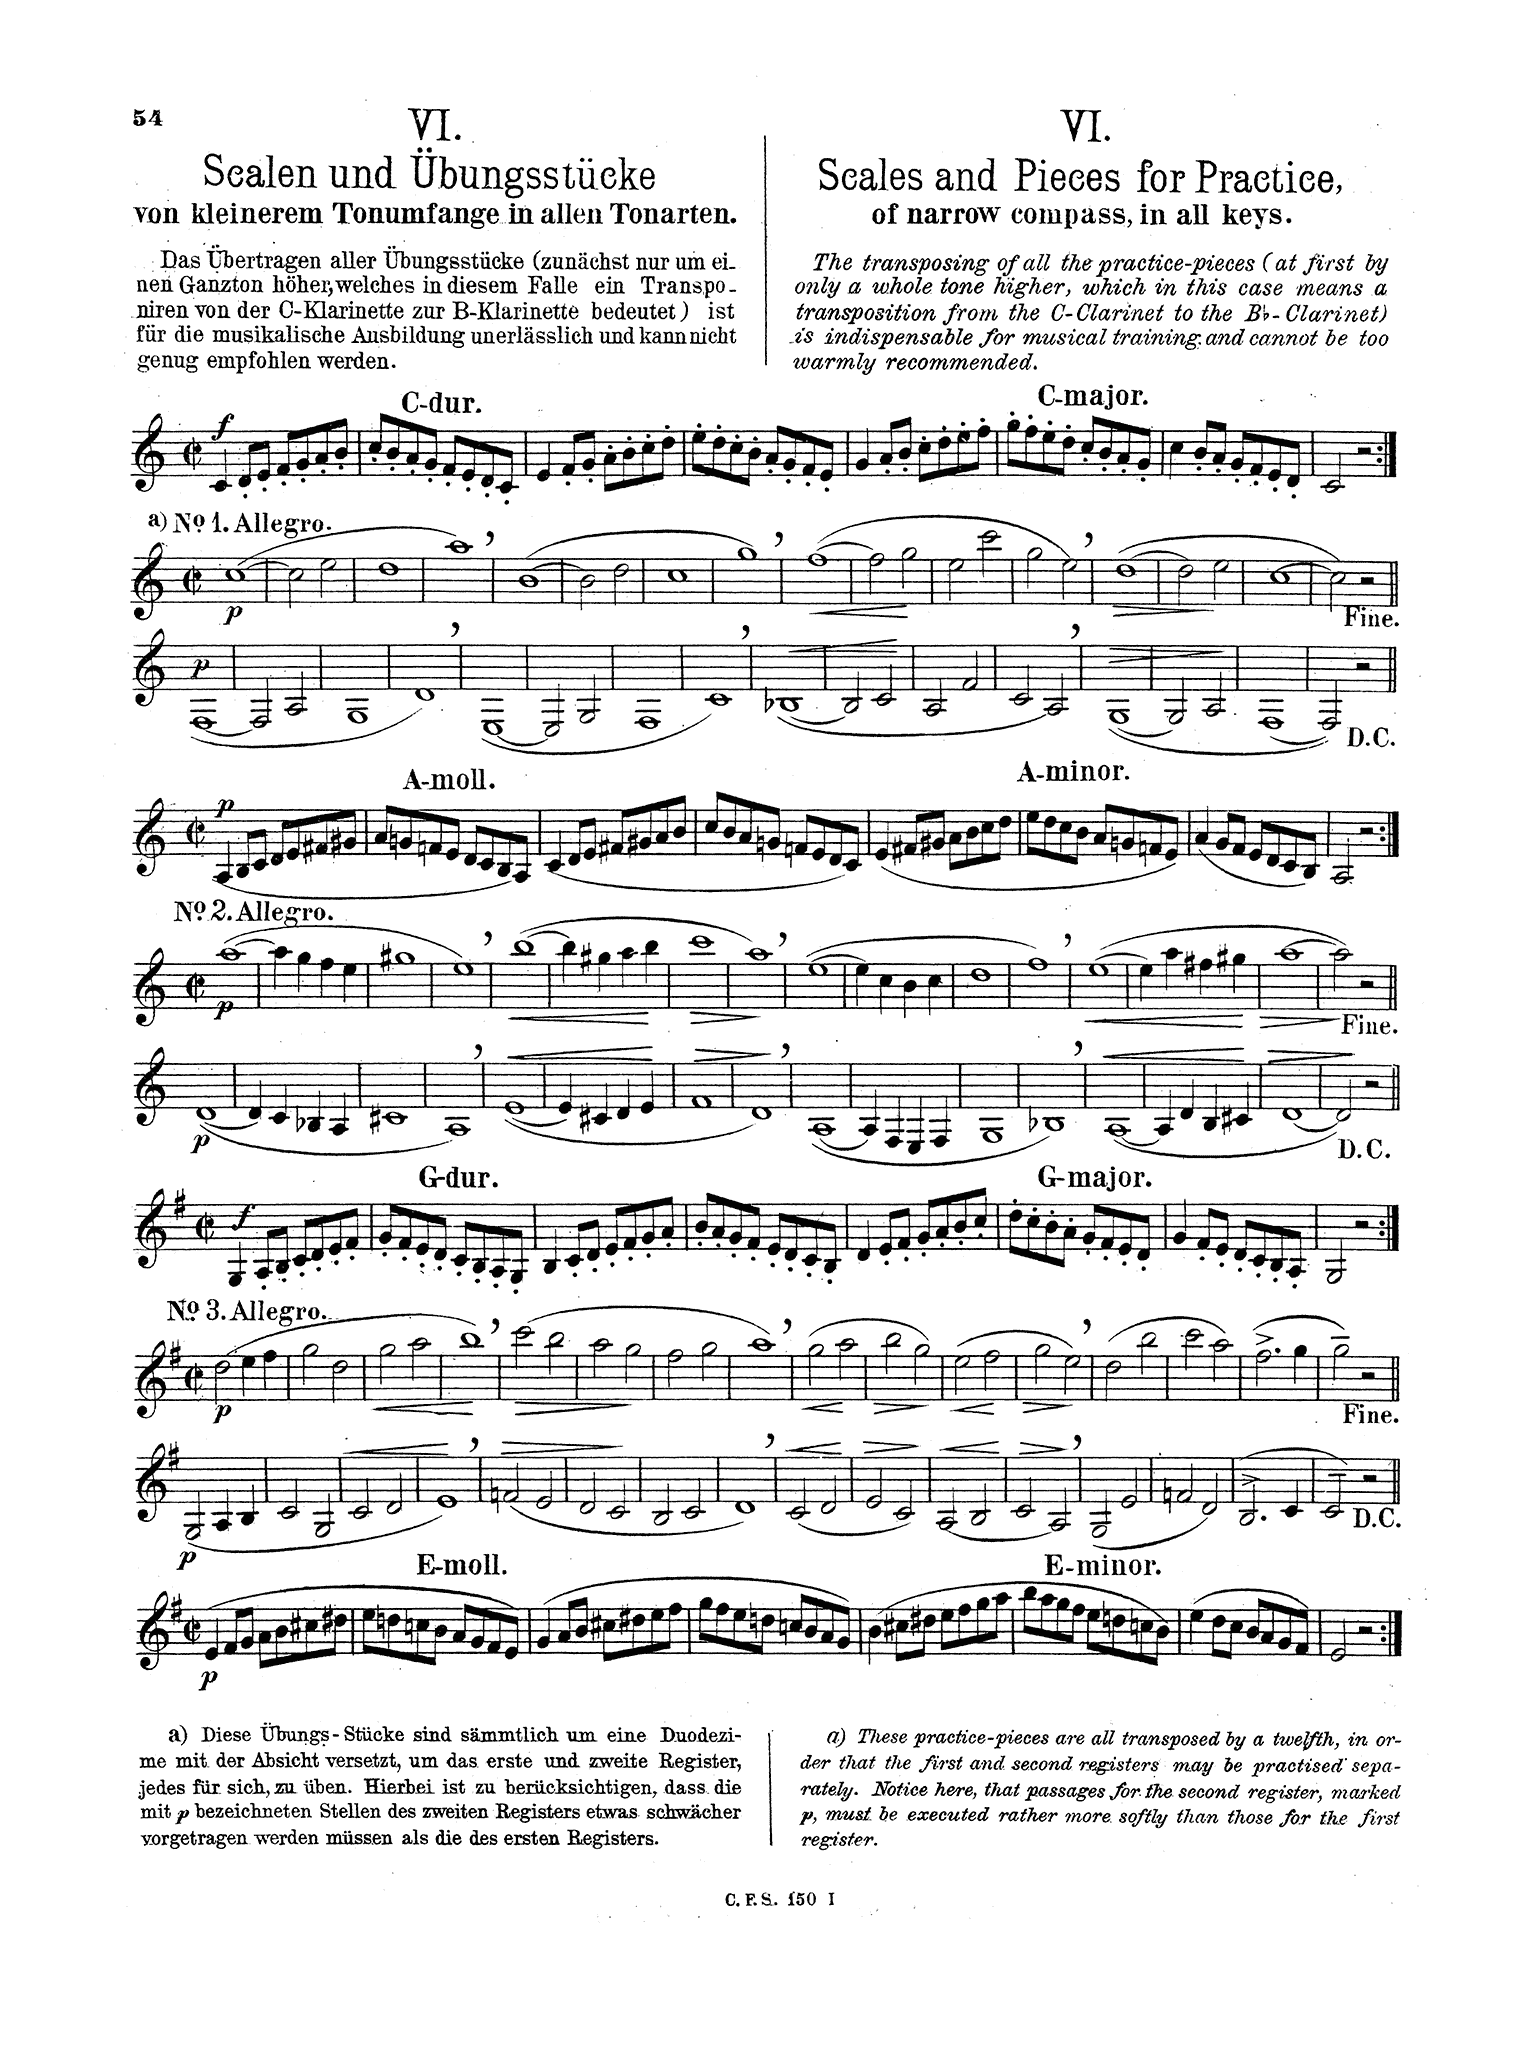 Stark Clarinet Method, Op. 49, Vol. 1: Section 2 of 2 page 54